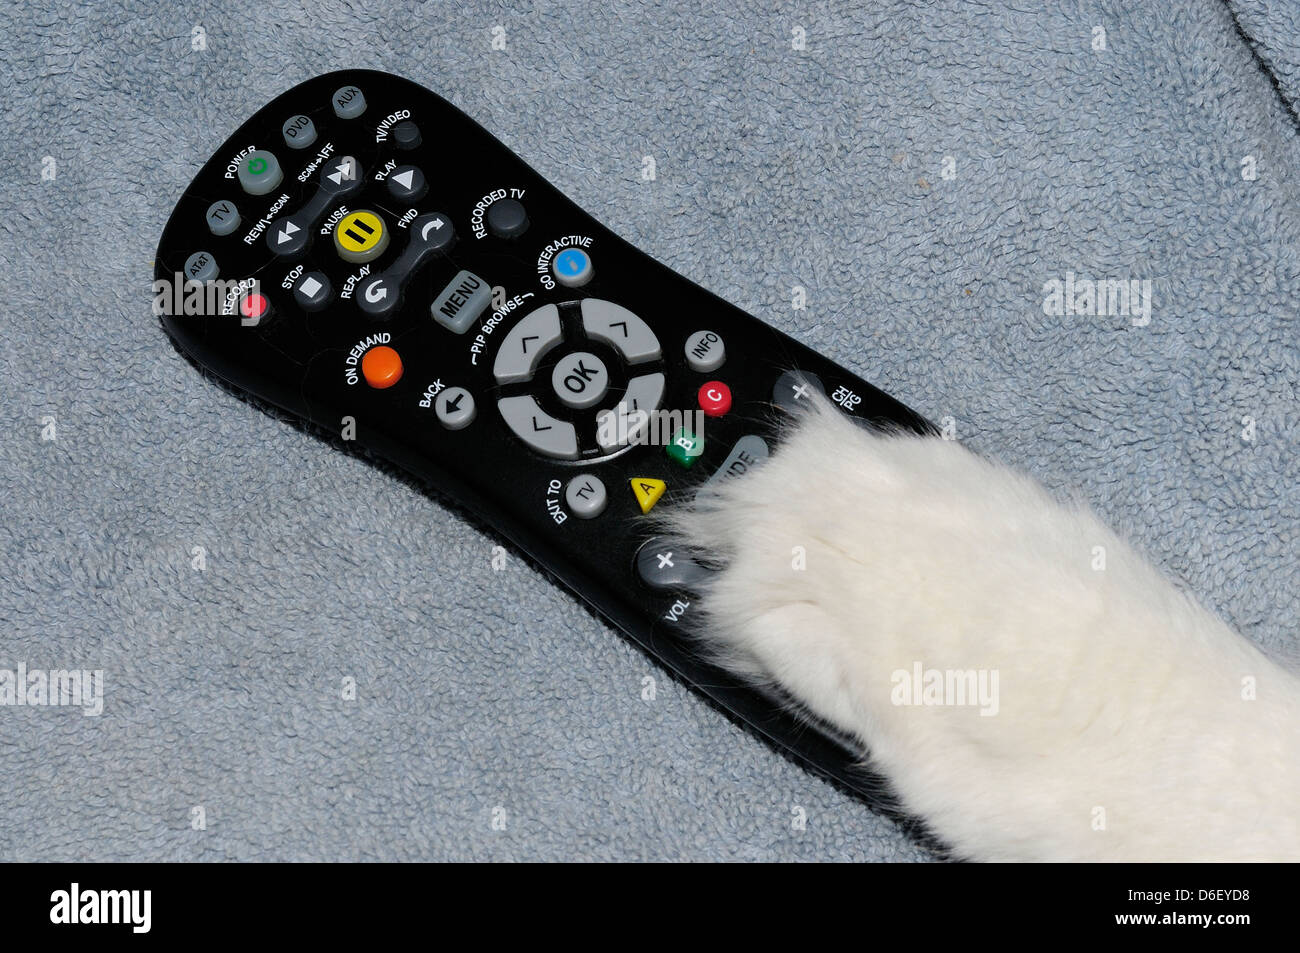 Cat paw on TV remote control. Stock Photo